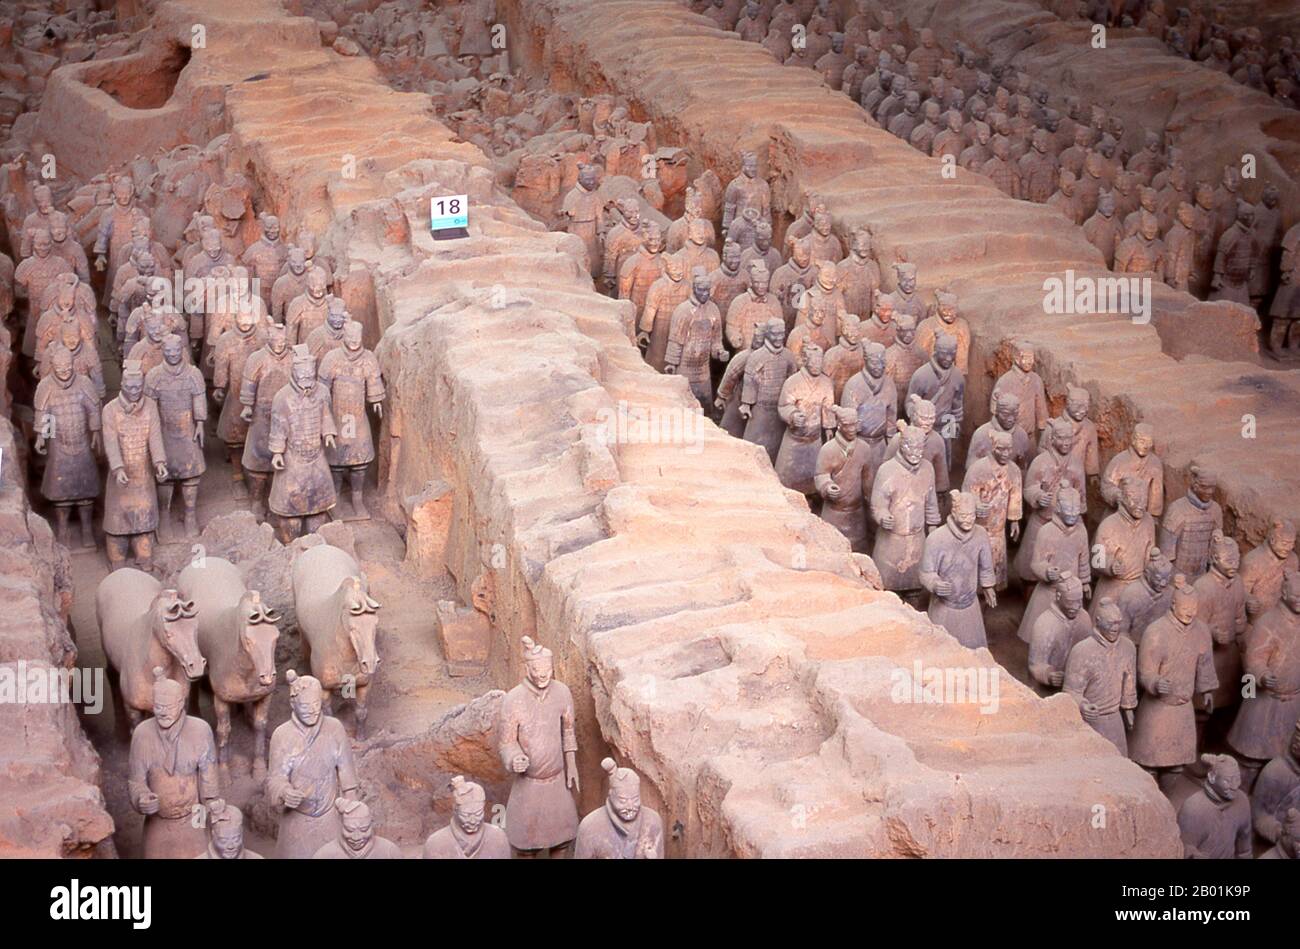 China: Warriors from the terracotta army guarding the tomb of Qin Shi Huang, first emperor of a unified China (r. 246-221 BCE), near Xi'an.  During a drought in 1974, farmers digging a well stumbled across one of the most amazing archaeological finds in modern history - the terracotta warriors.  The terracotta army, thousands of soldiers, horses and chariots, had remained secretly on duty for some 2,000 years, guarding the nearby mausoleum of Qin Shu Huang, the first emperor of a unified China. Stock Photo